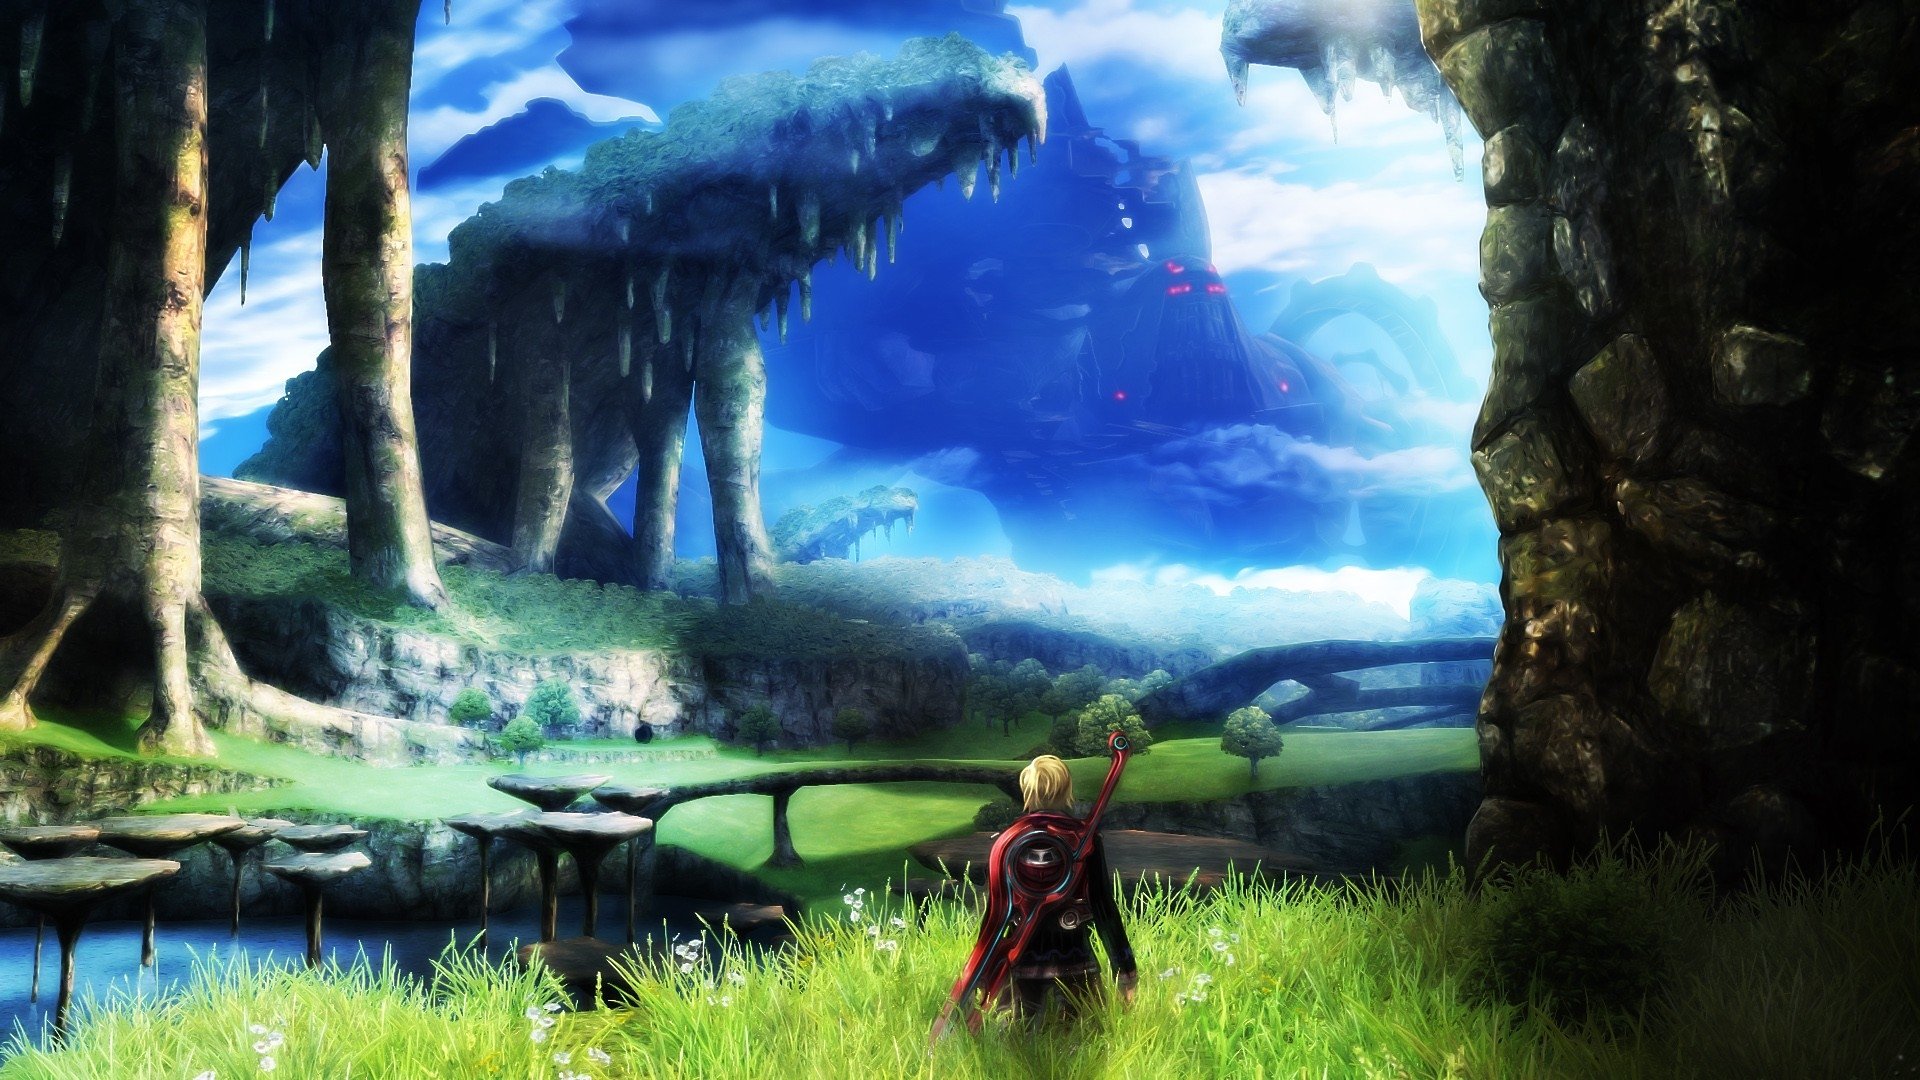 Xenoblade Chronicles HD Wallpaper Background Image